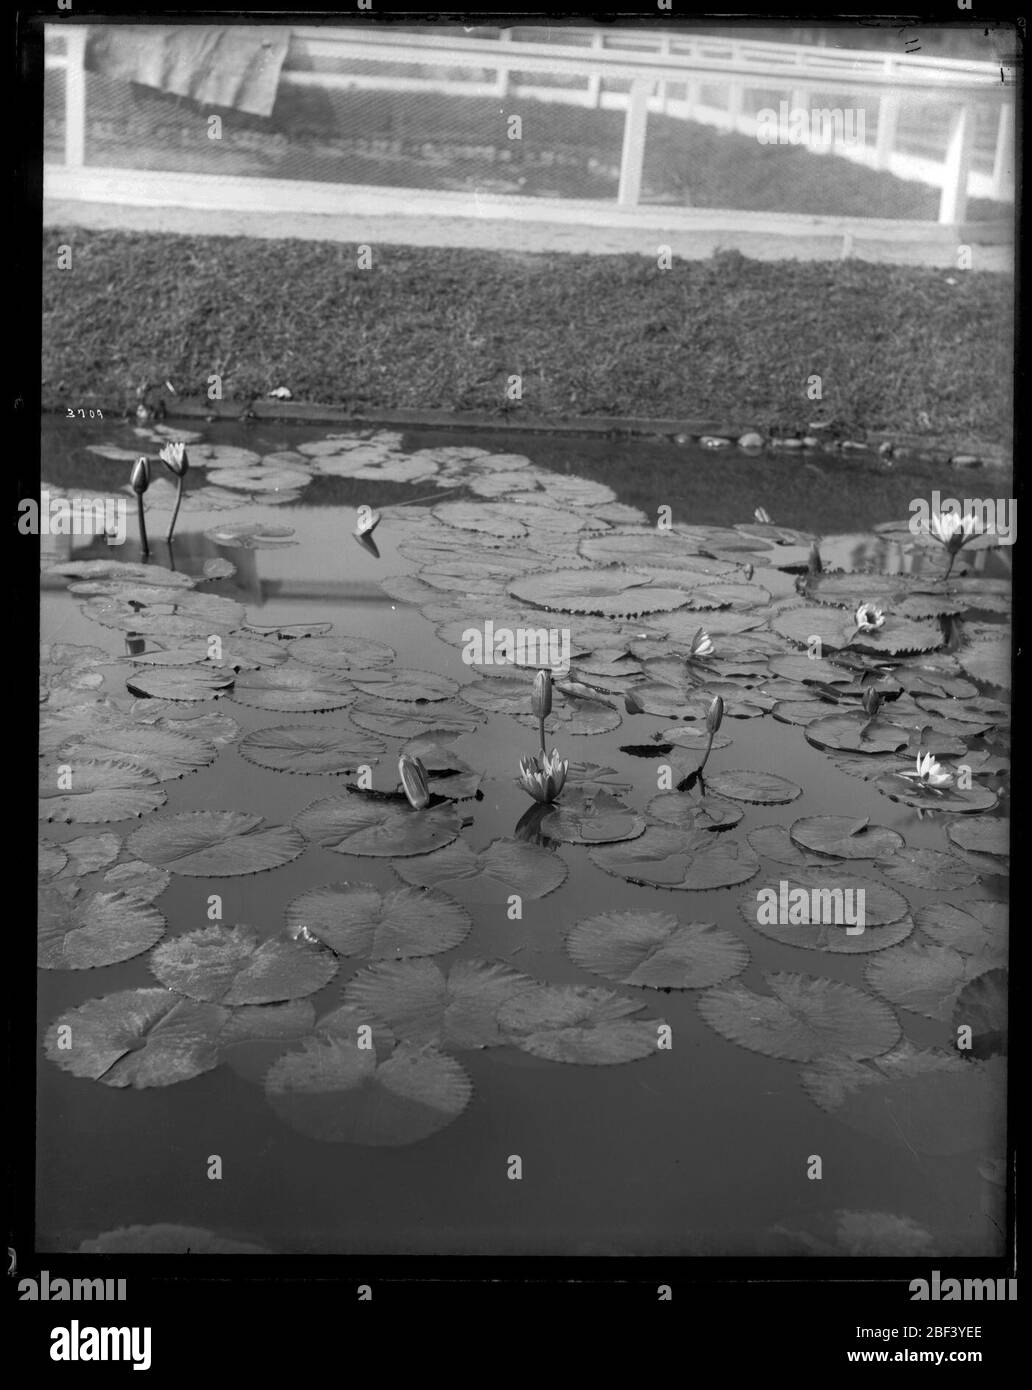 US Fish Commission Hatchery Ponds. U.S. Fish Commission fish hatchery ponds for the production of carp, golden ide, and tench, located near the grounds of the Washington Monument.Smithsonian Institution Archives, Acc. 11-007, Box 016, Image No. Stock Photo